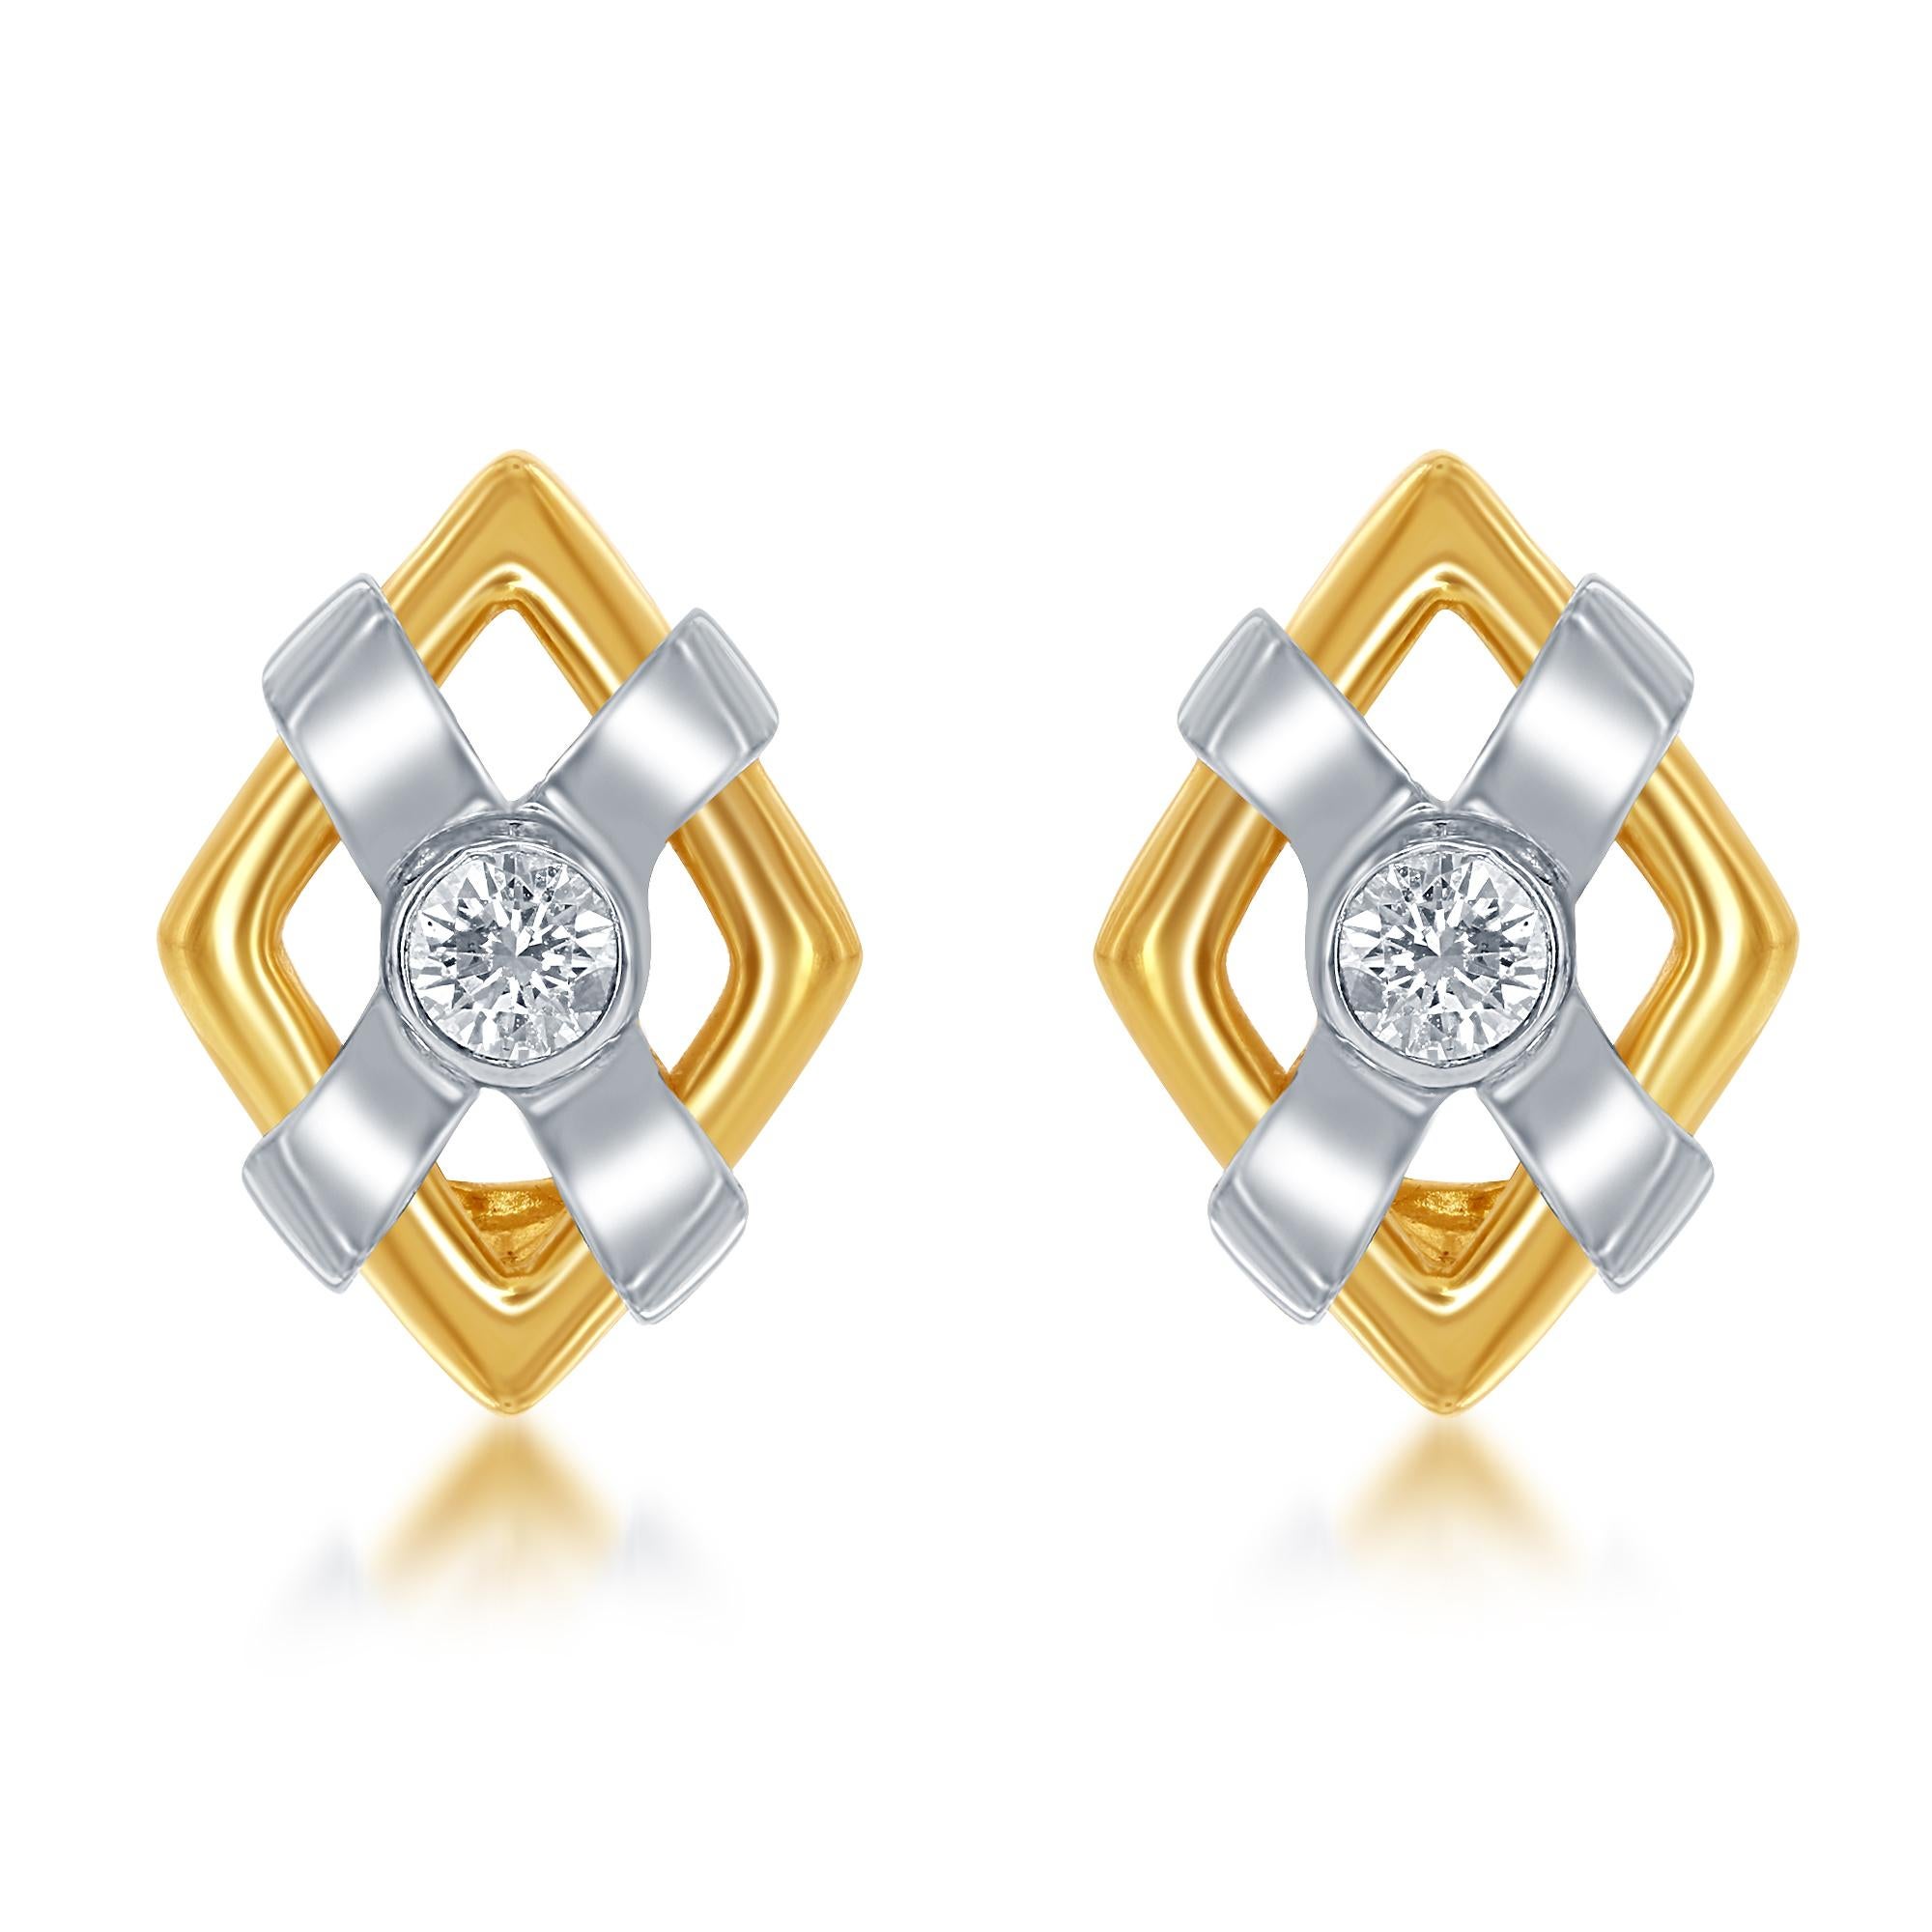 Round Cut Diana M. 14 kt White and Yellow Gold Diamond Earrings Containing 0.50 cts  For Sale